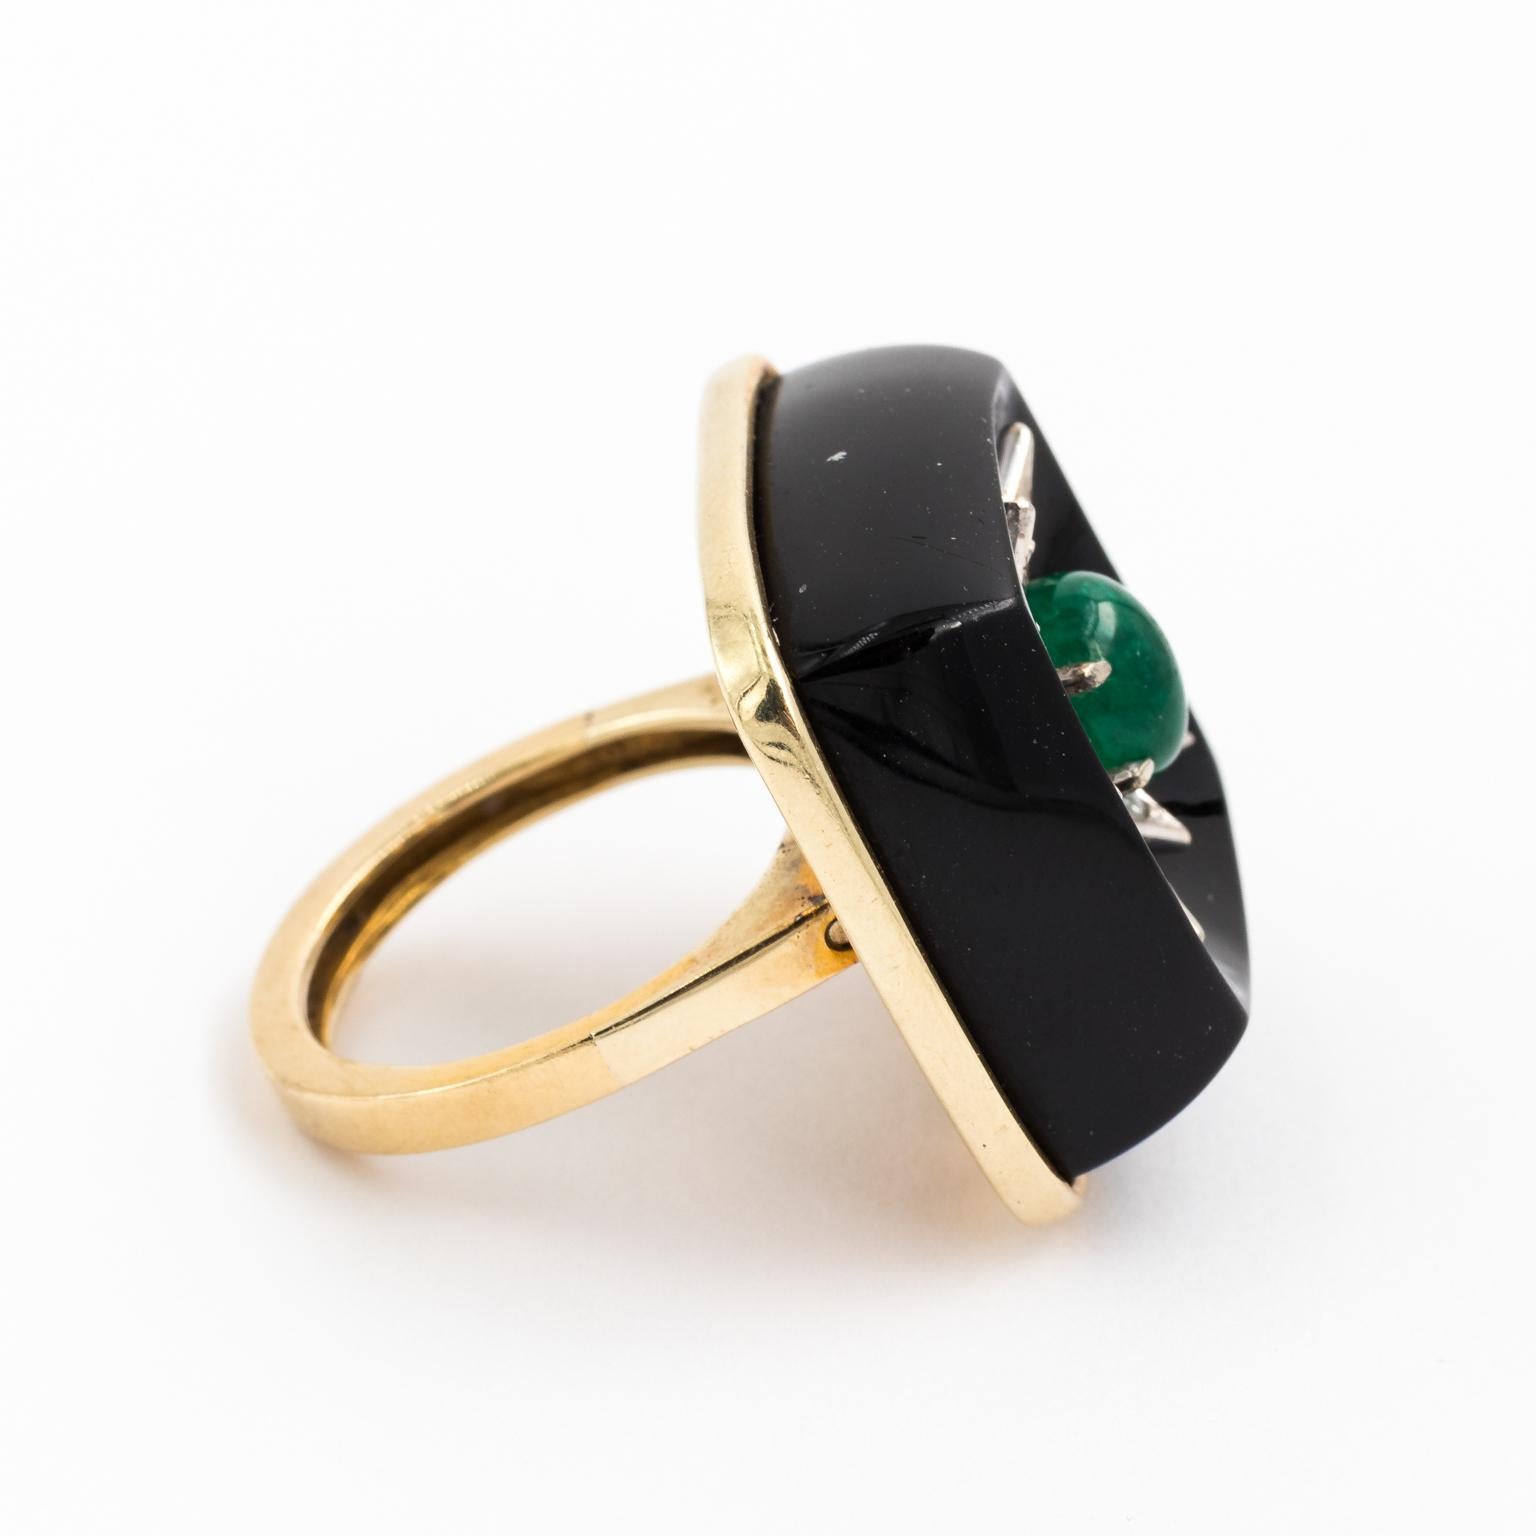 14 Karat Gold Onyx Cocktail Ring with Emerald and Diamond Star In Good Condition For Sale In St.amford, CT